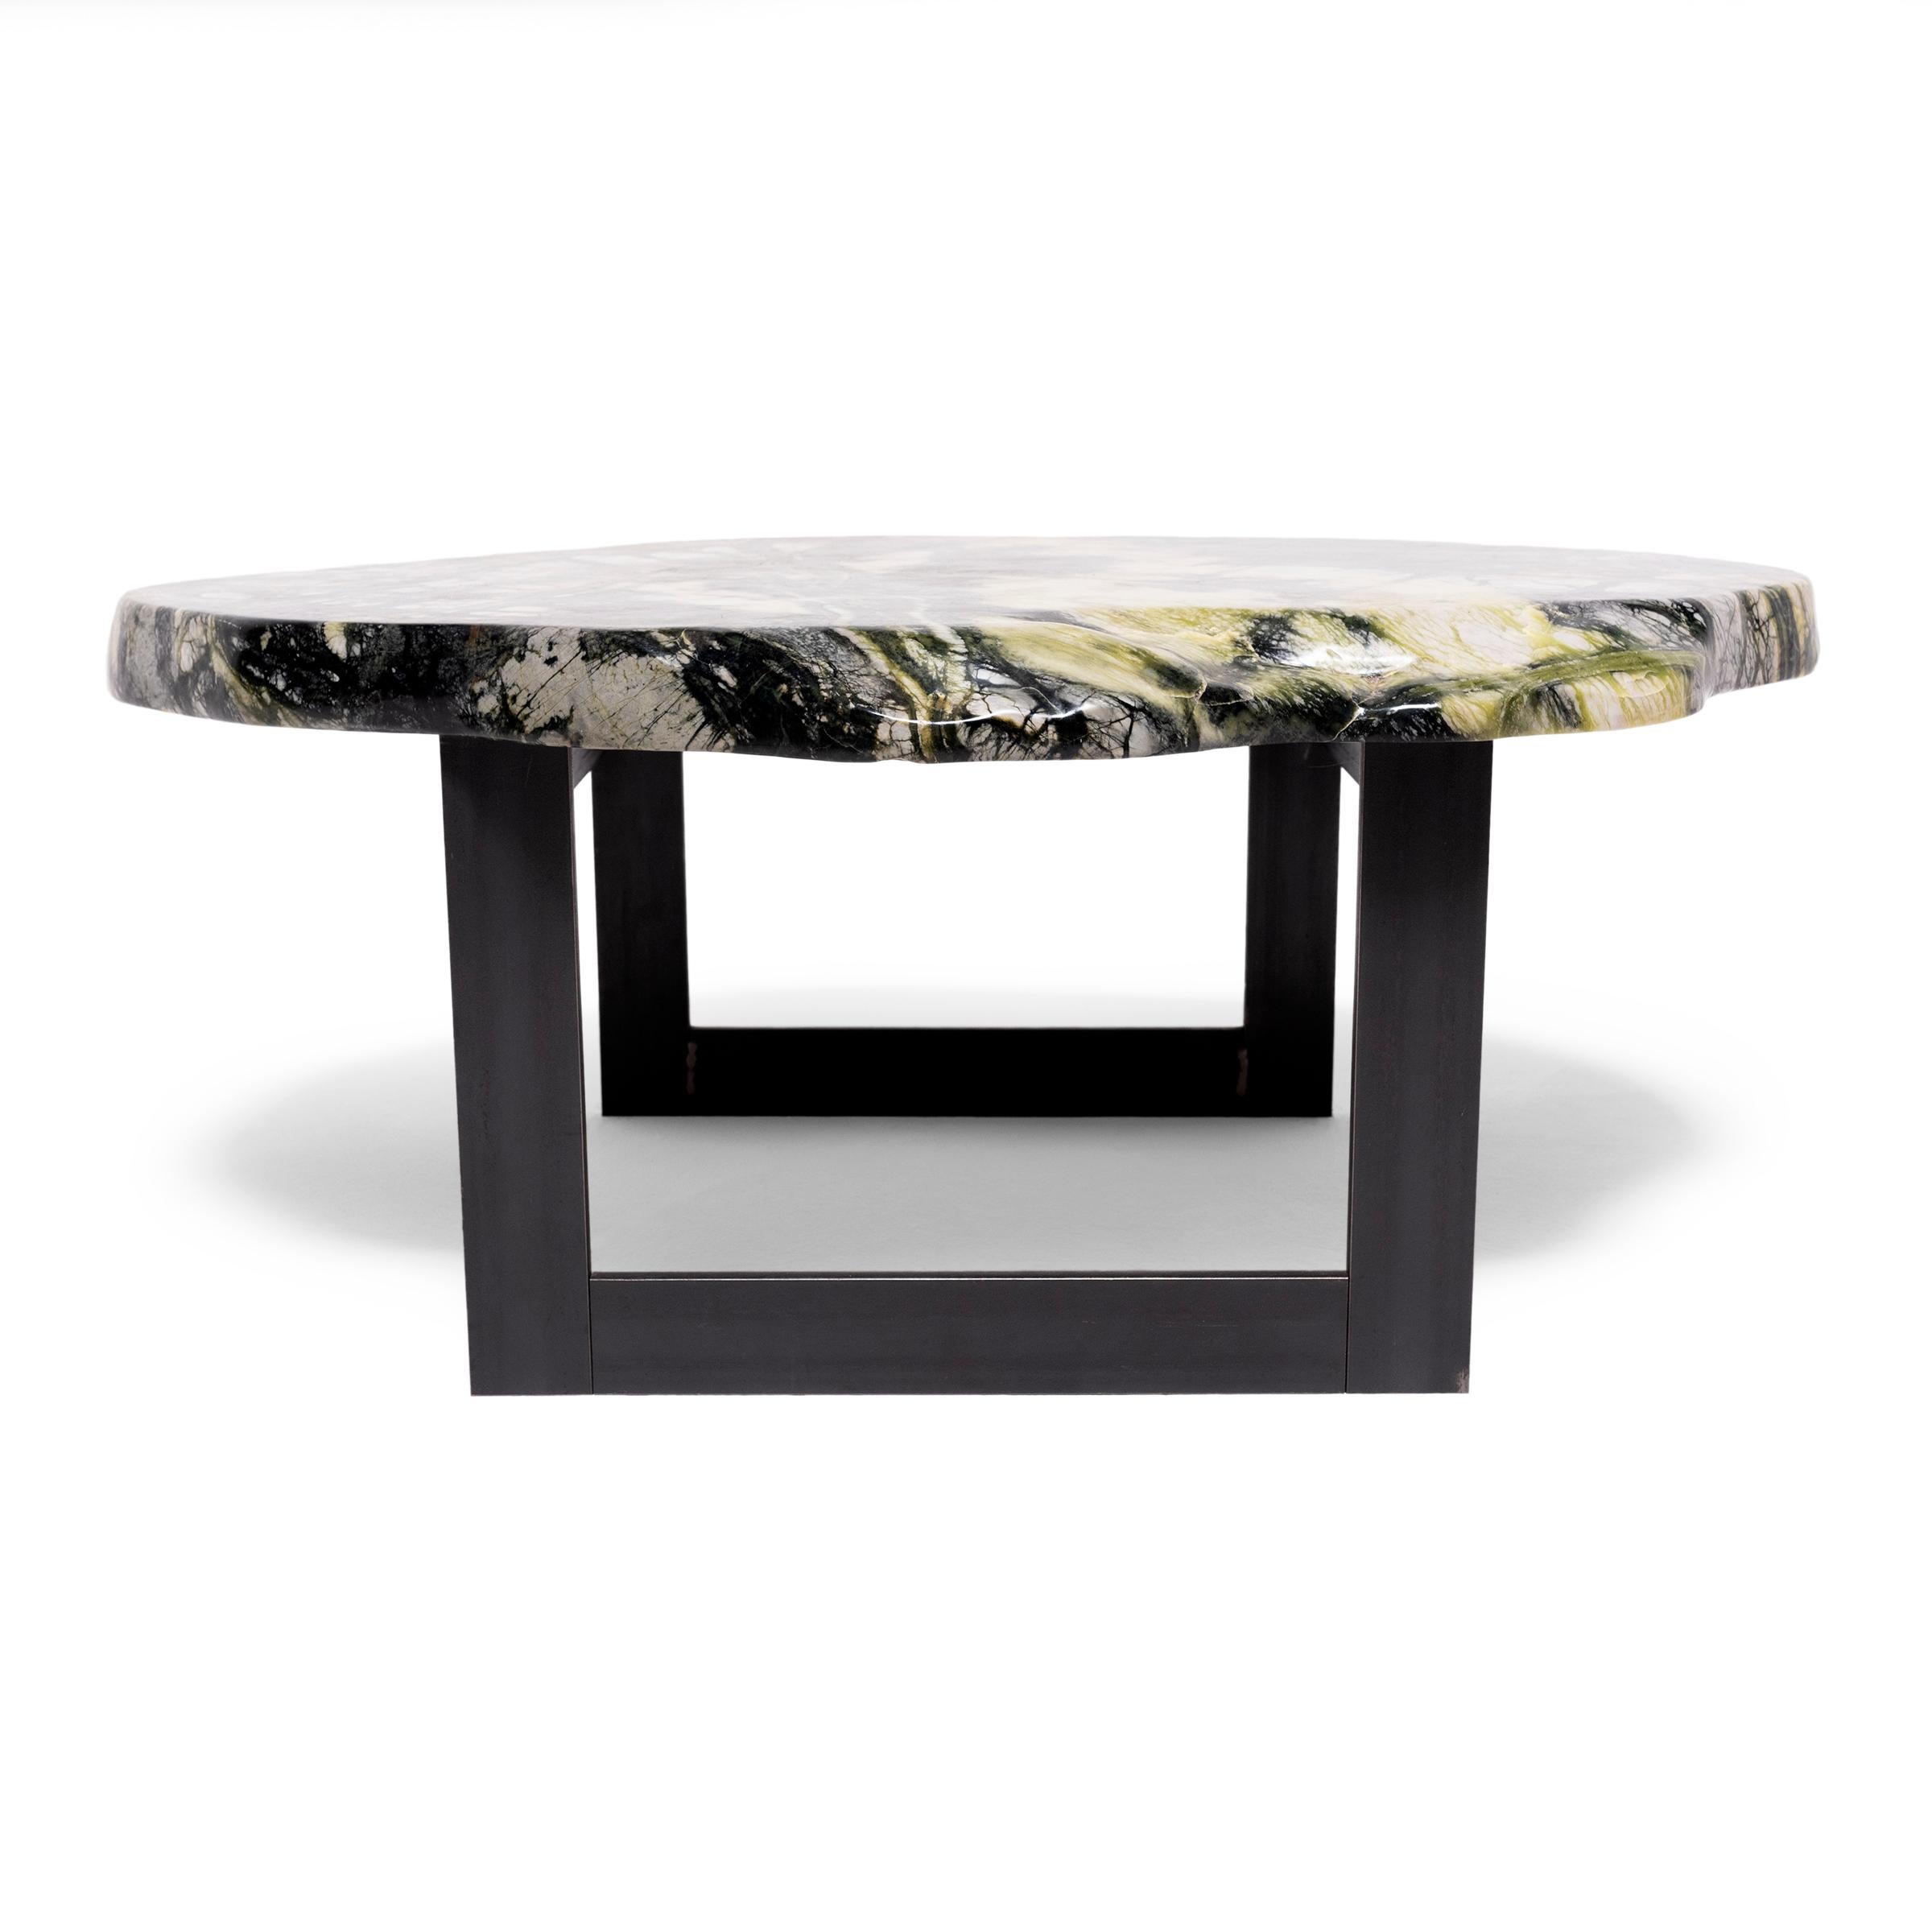 Chinese Low Greenery Meditation Stone Table